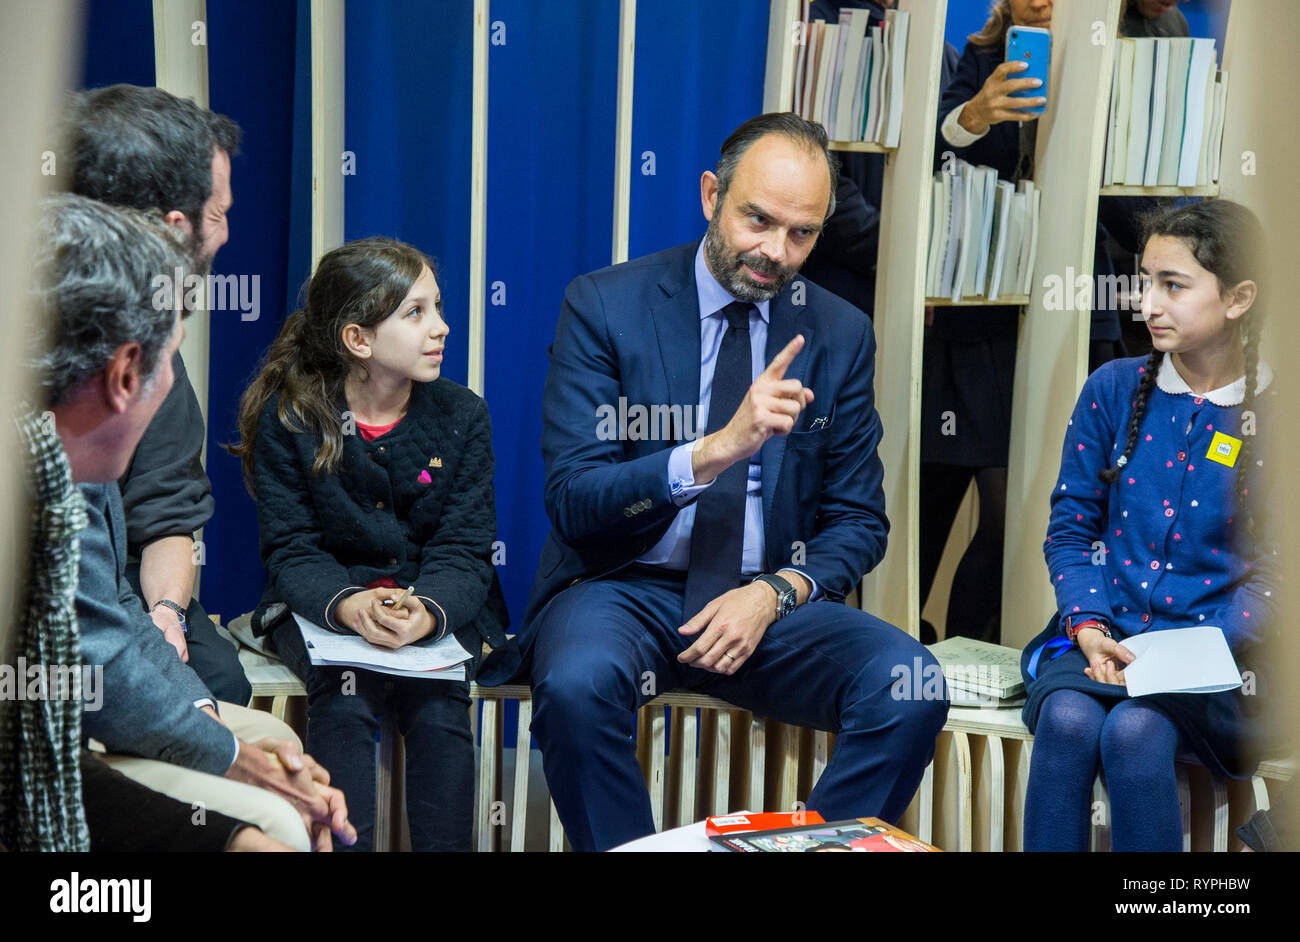 French Prime Minister Edouard Philippe seen speaking with child during his visit at the 2019 Paris Book Fair. Stock Photo